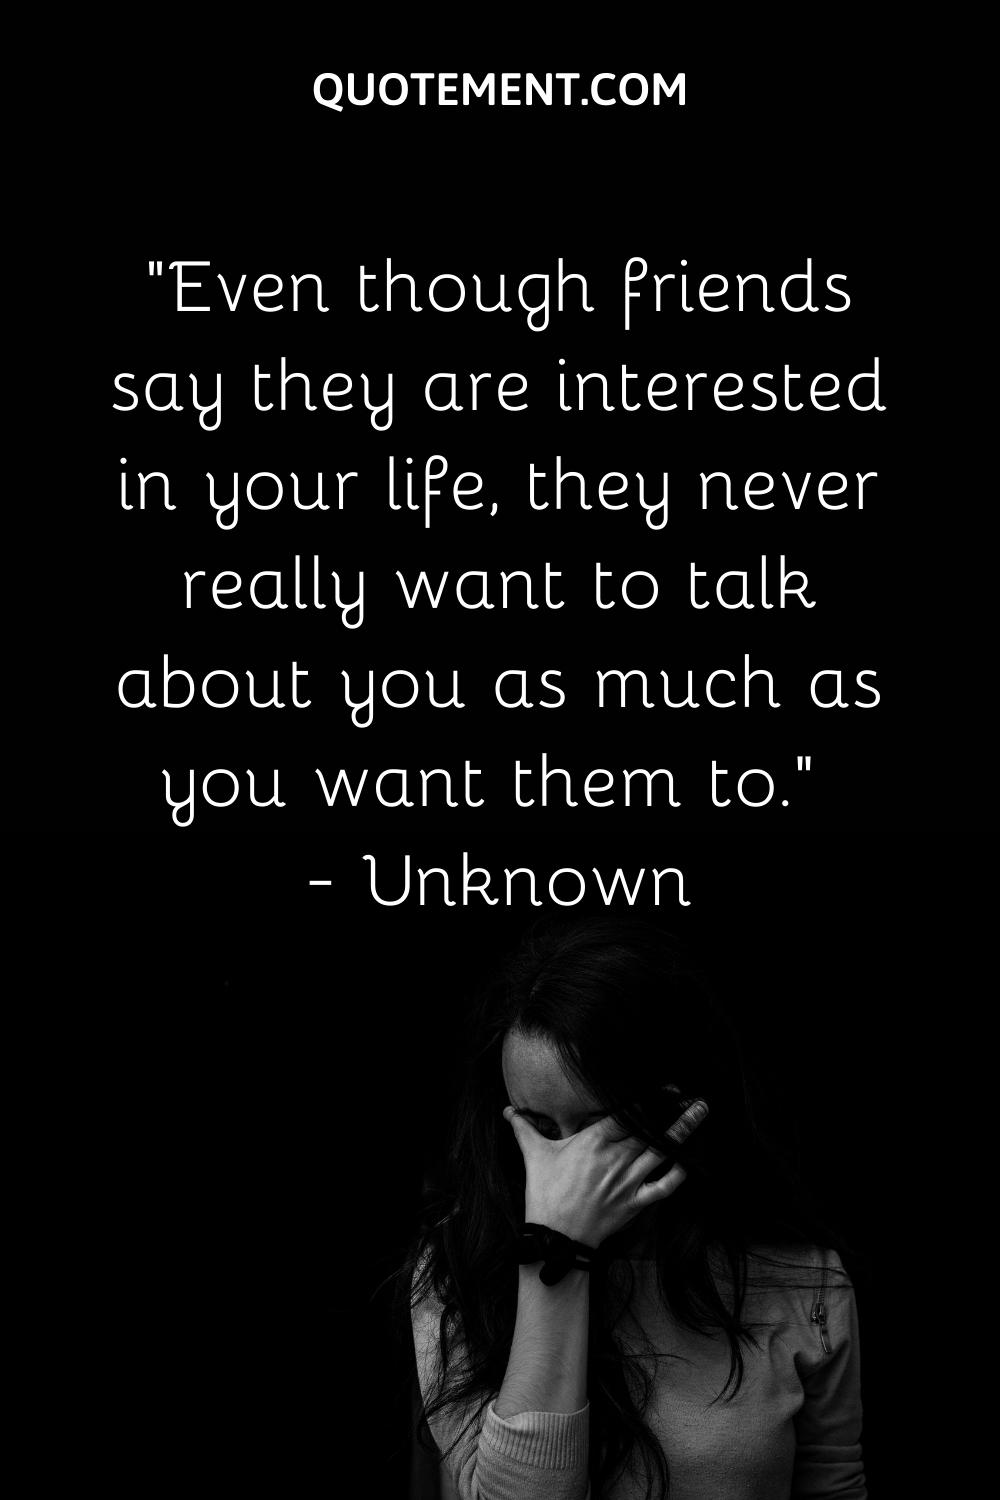 Even though friends say they are interested in your life, they never really want to talk about you as much as you want them to